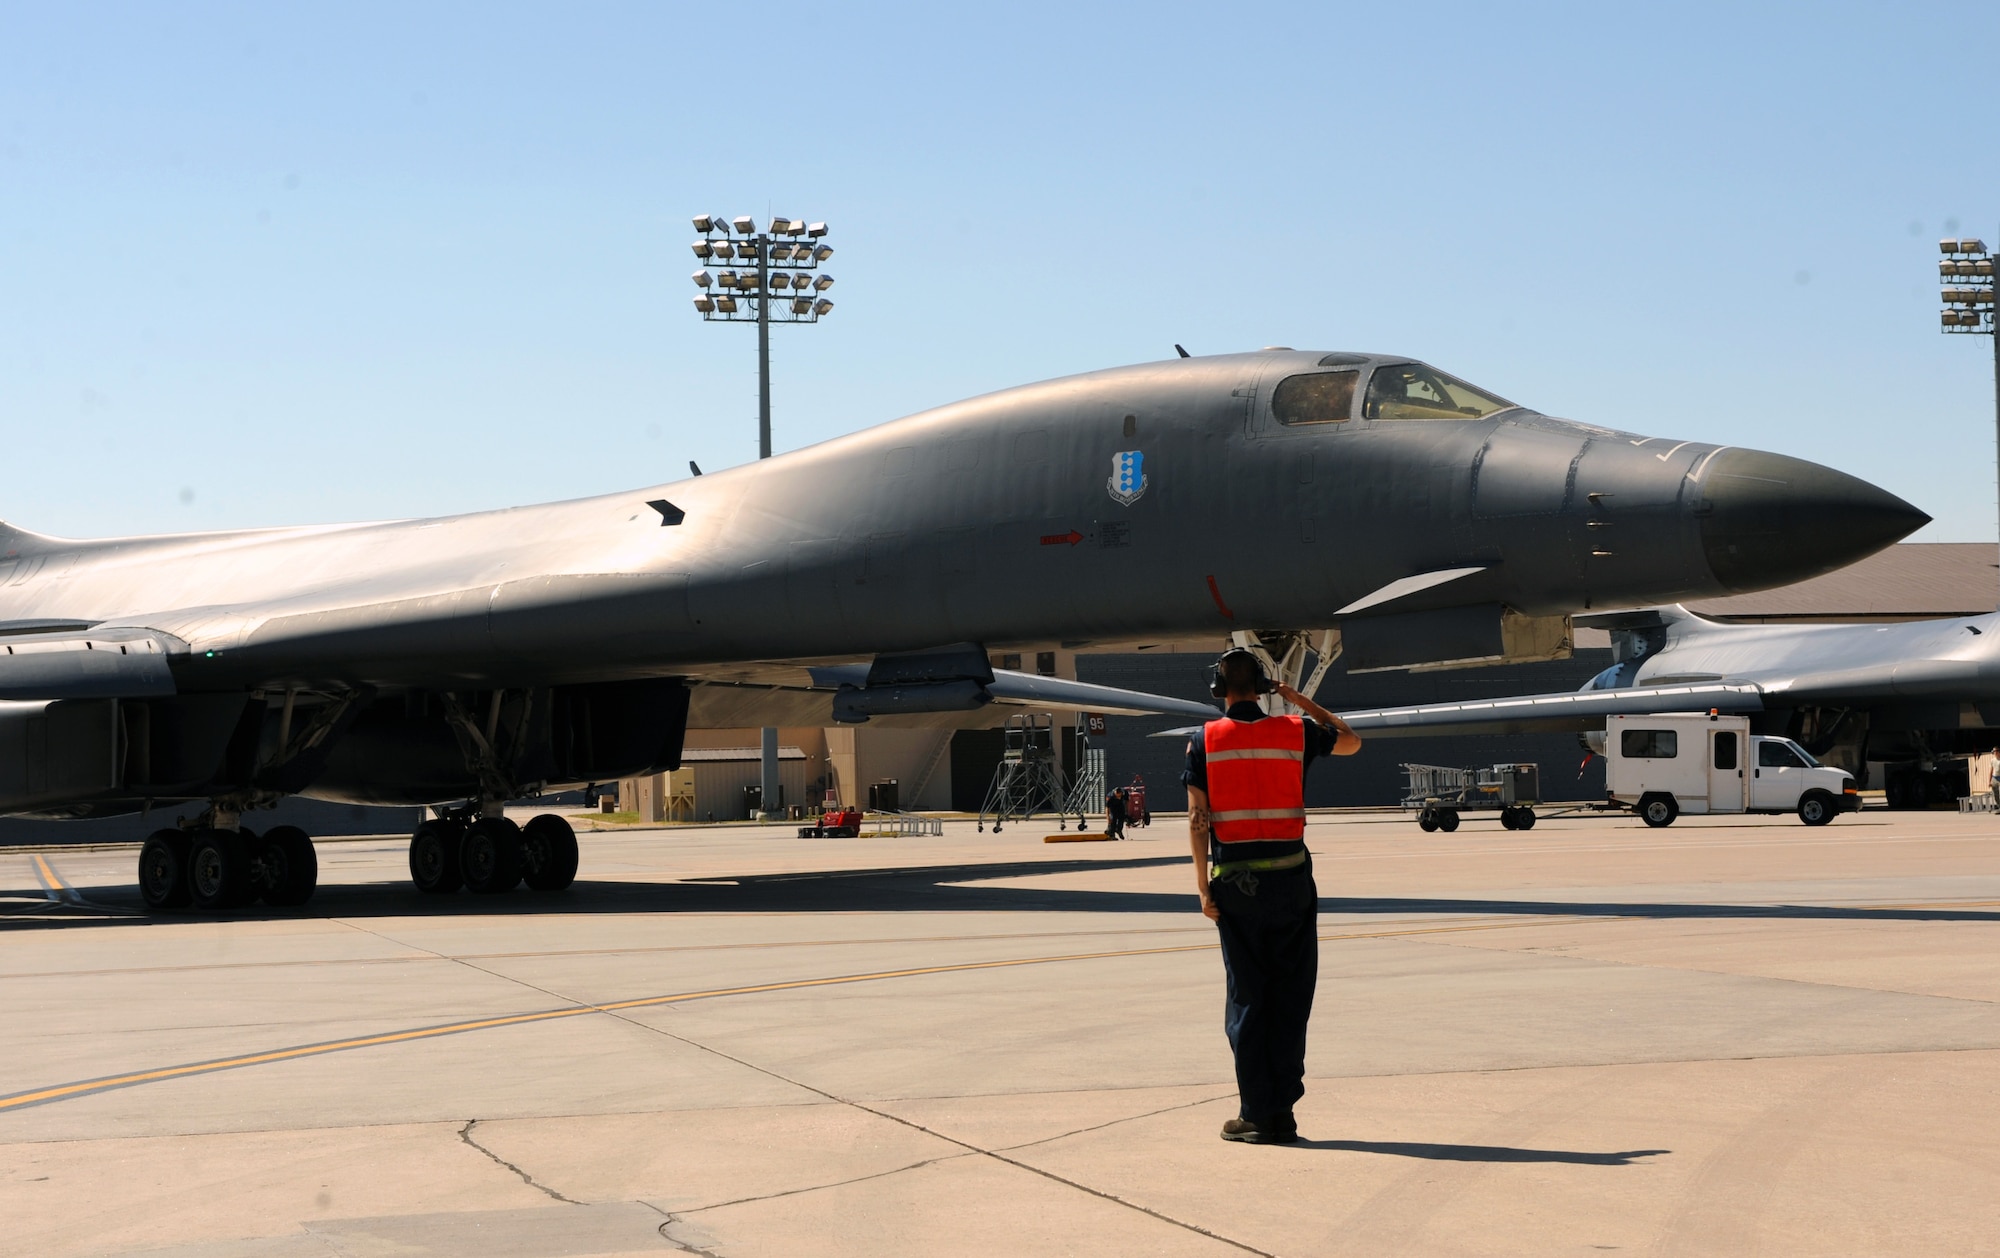 An Airman from the 37th Aircraft Maintenance Unit marshals a B-1 bomber out to the flightline at Ellsworth Air Force Base, S.D., to perform a flyover in honor of U.S. Army Air Corps Staff Sgt. David Thatcher, June 27, 2016. Thatcher, one of the last remaining Doolittle Raiders, passed away from complications of a stroke on June 22. (U.S. Air Force photo by Airman 1st Class Denise M. Nevins/Released)